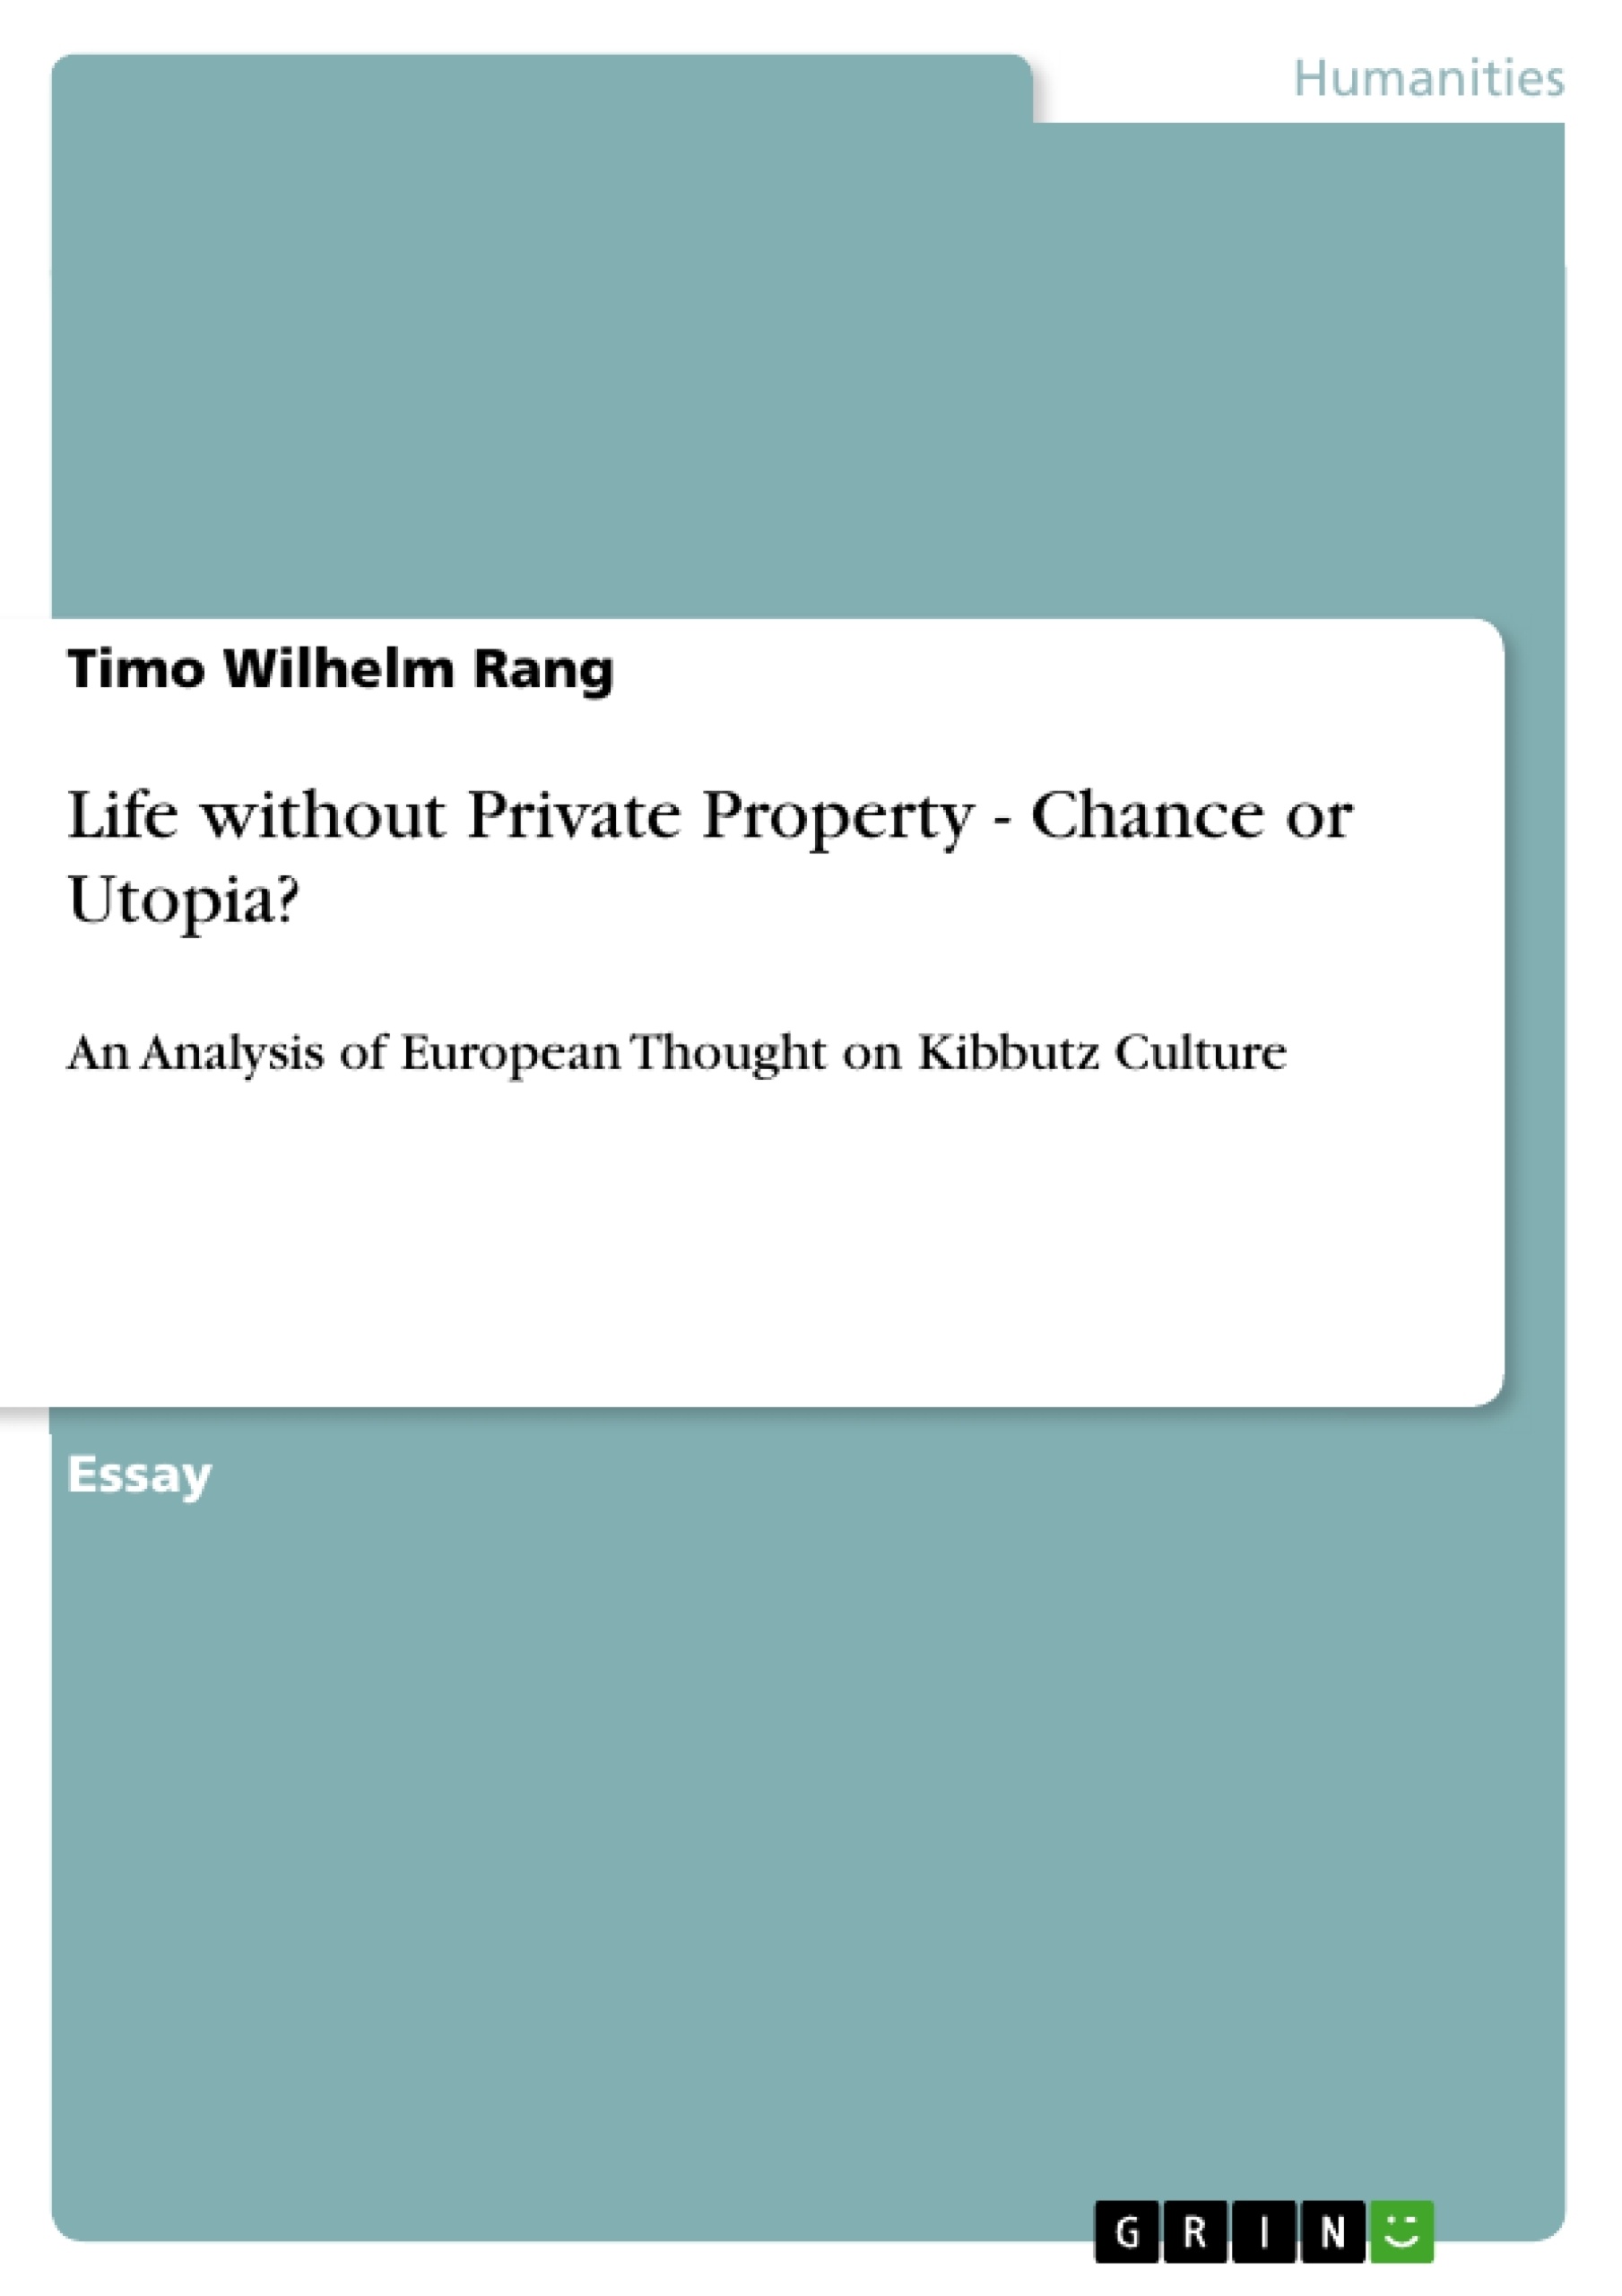 Title: Life without Private Property - Chance or Utopia?